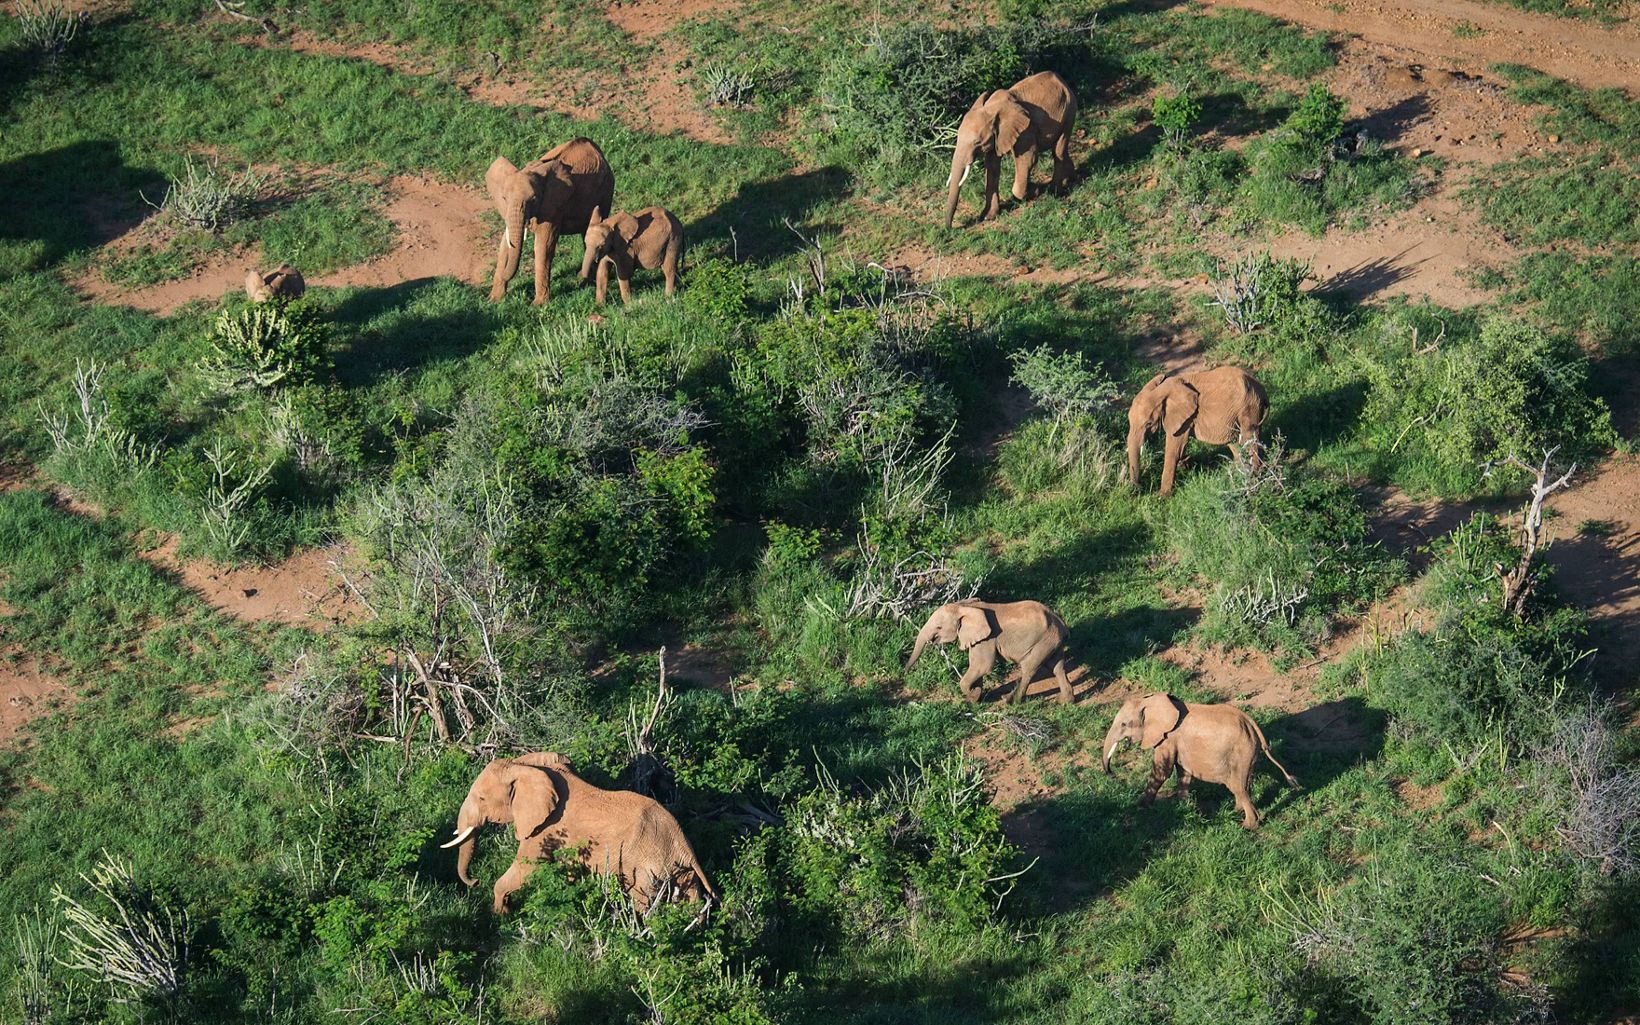 Aerial view of elephants at Loisaba Conservancy in northern Kenya.